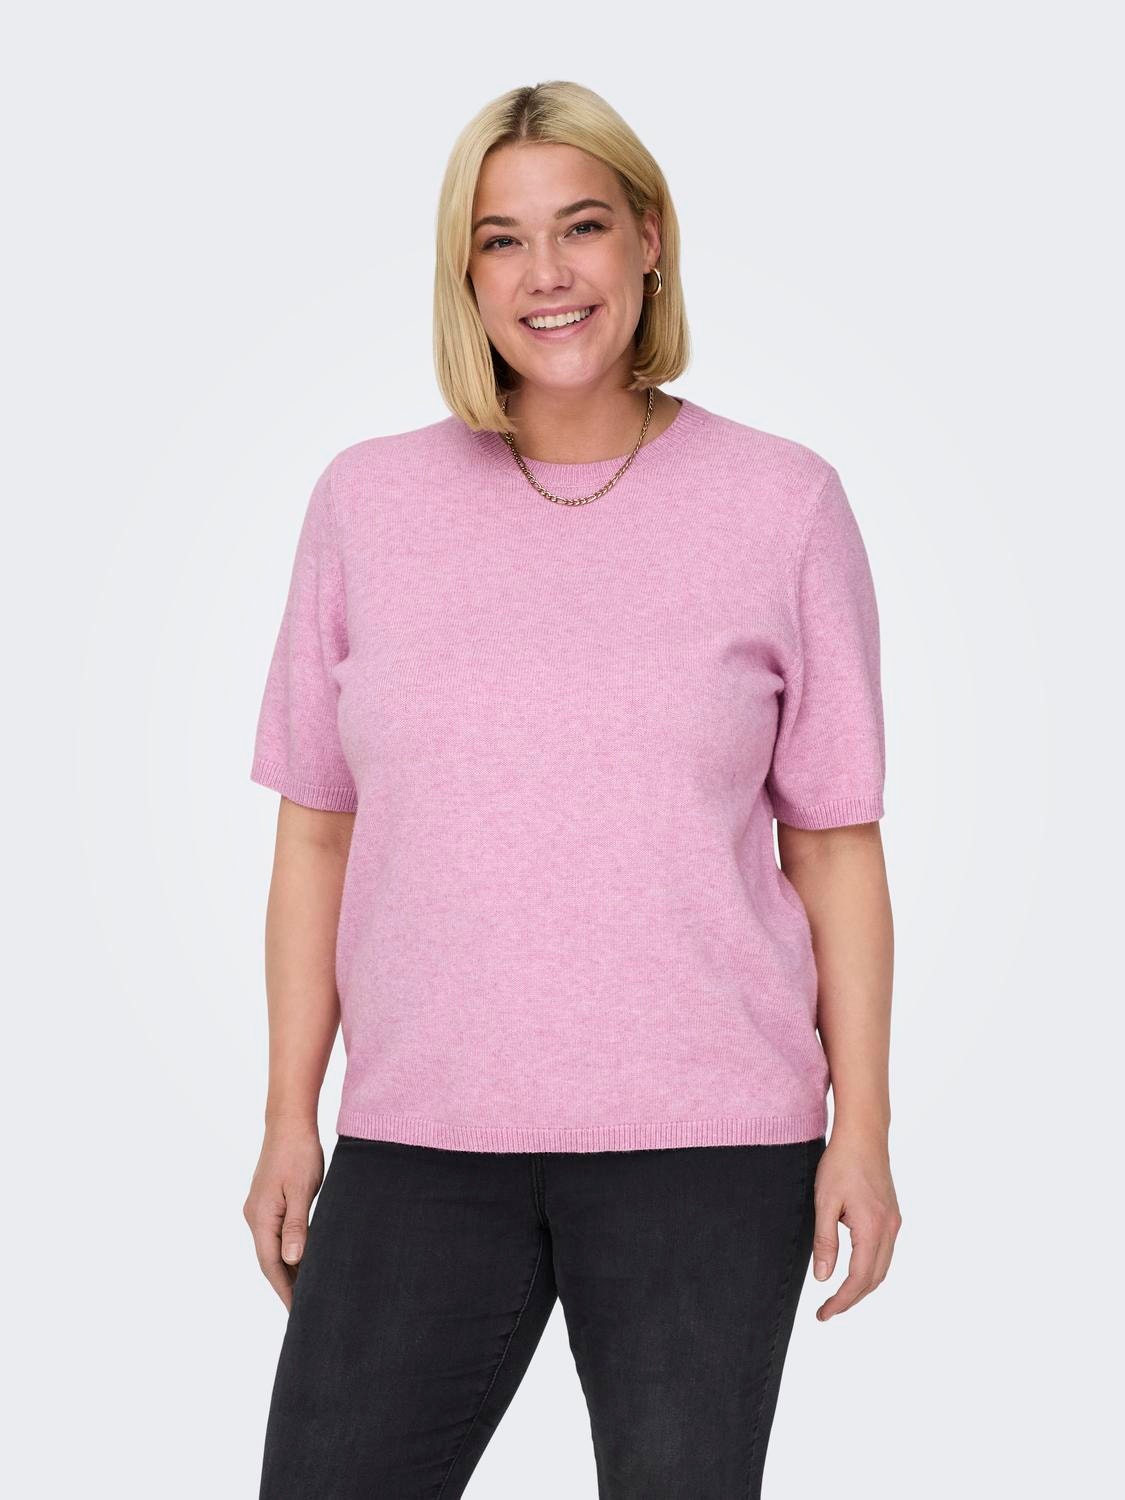 ONLY Curvy knitted top -Strawberry Moon - 15314968